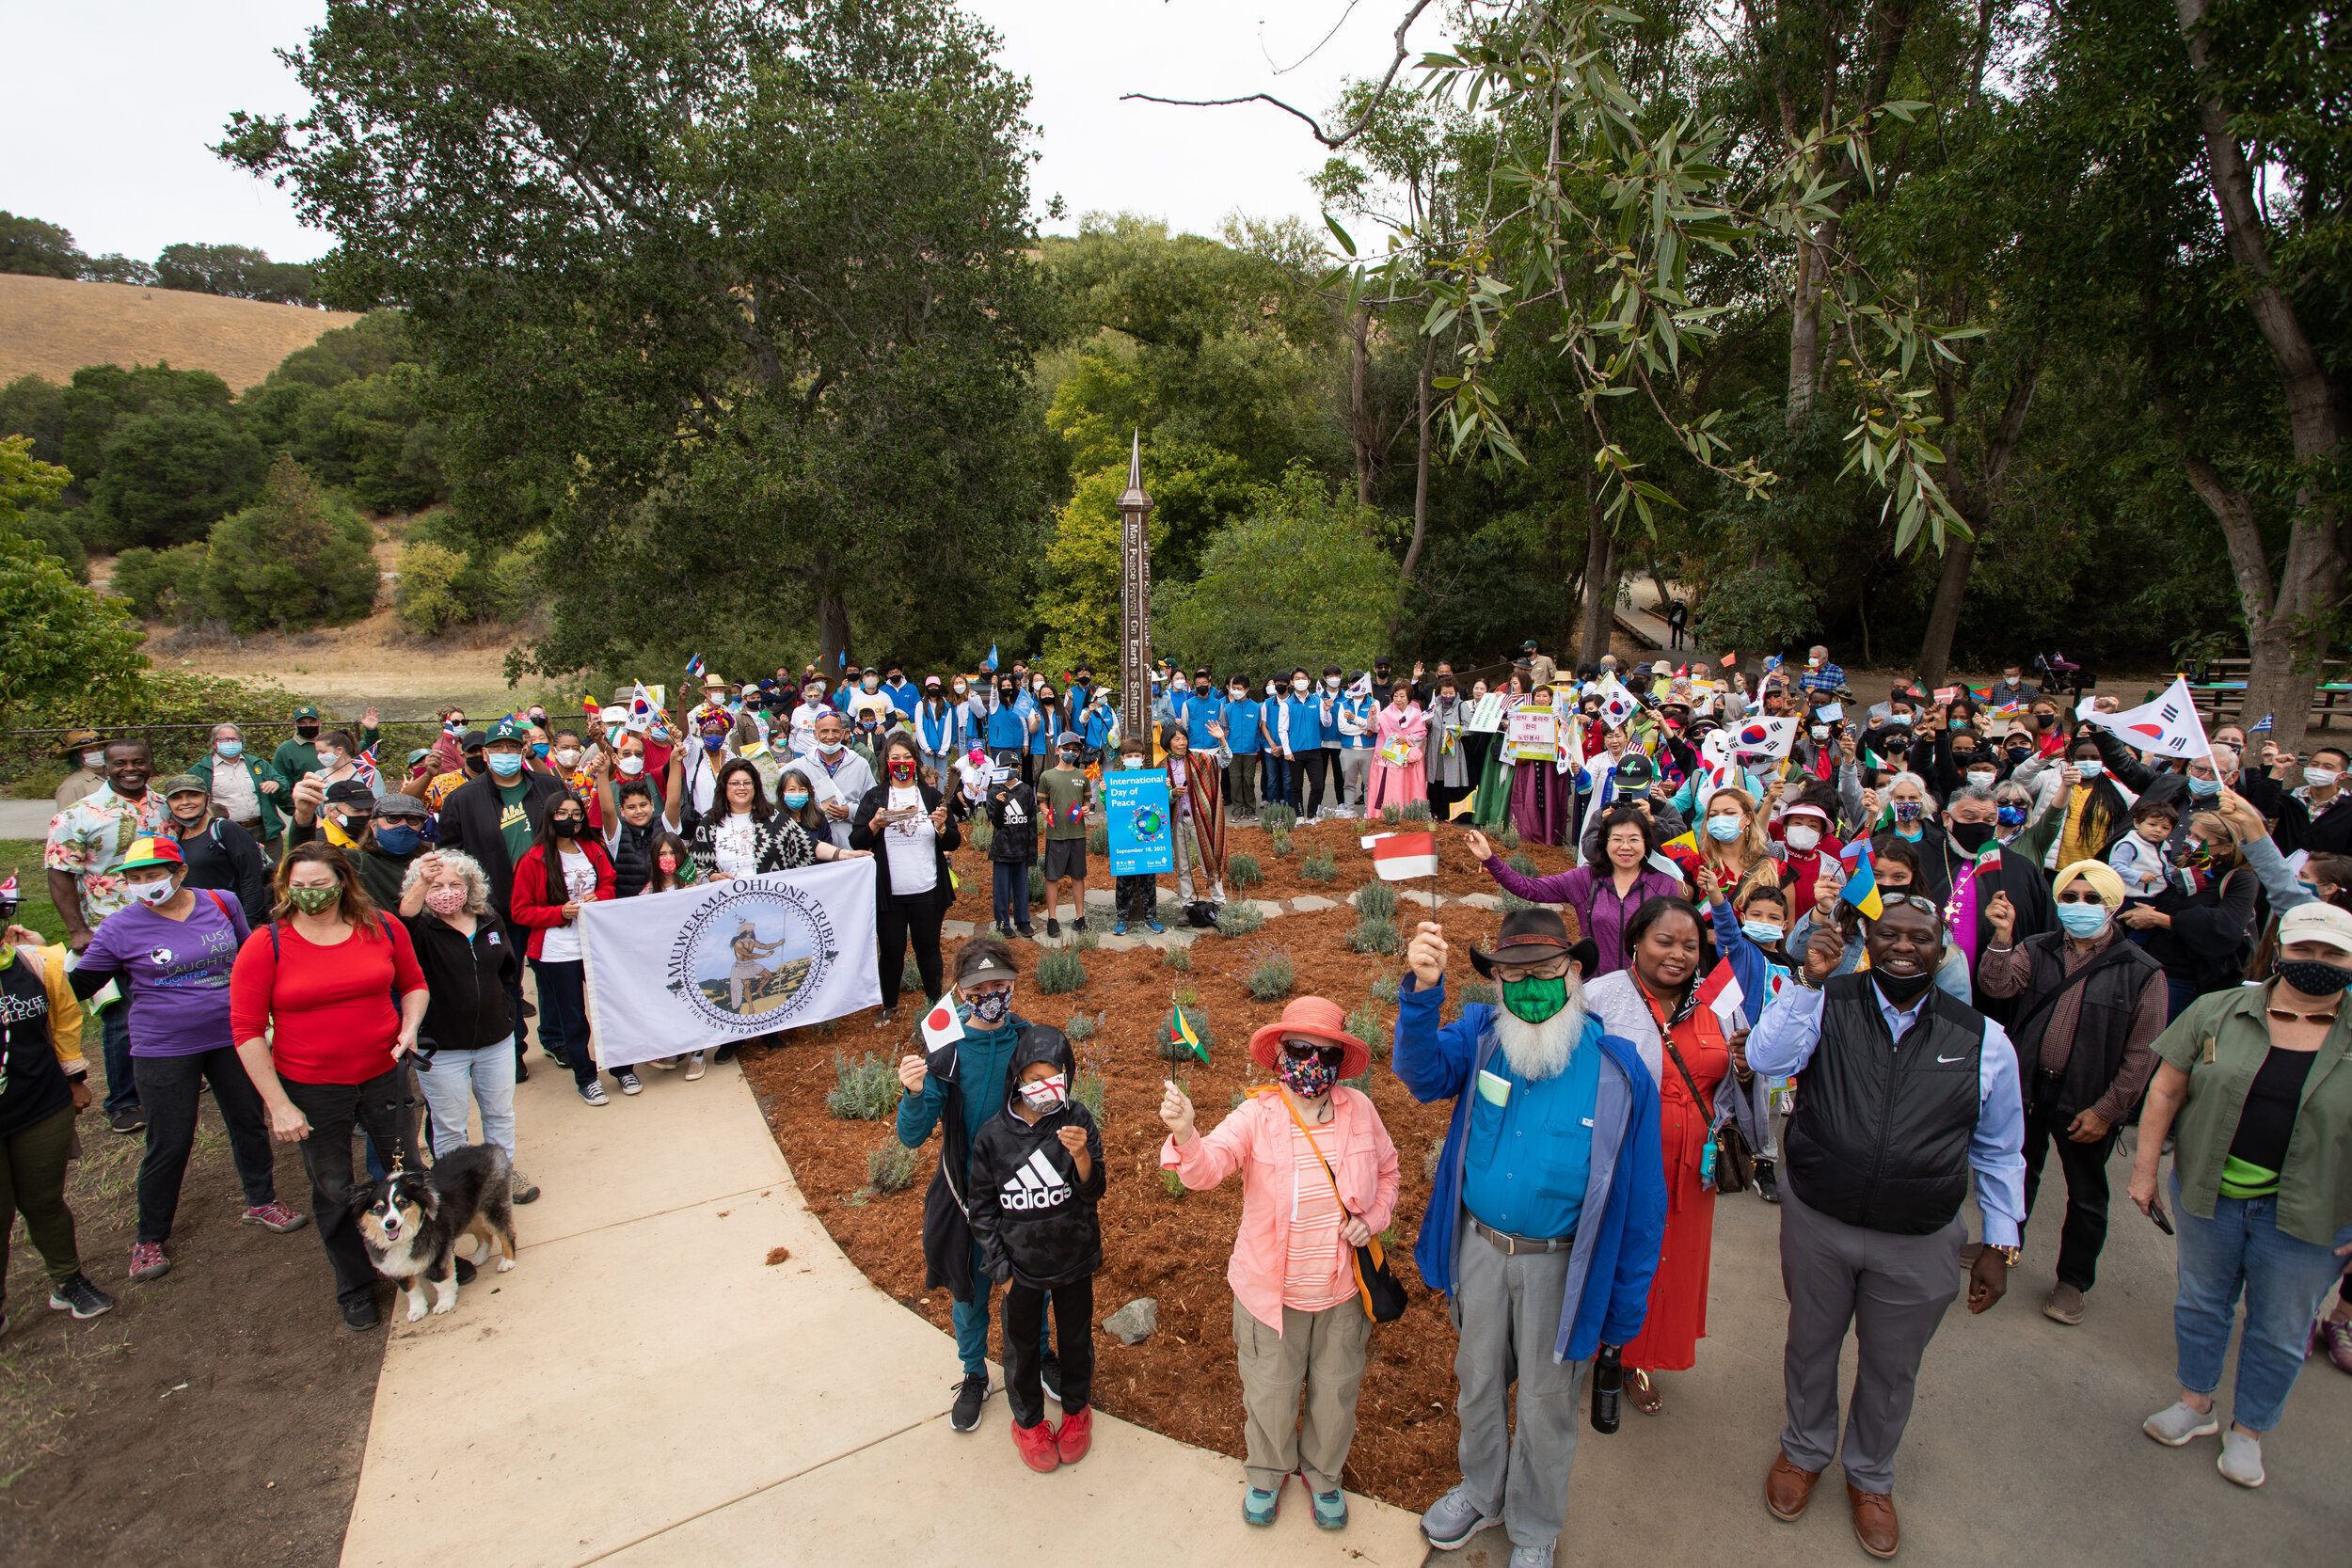  More than 300 people attended the September 18&nbsp;&nbsp;International Peace Day celebration at Lake Chabot in Castro Valley which included the installation of a 12-foot Peace Pole. 